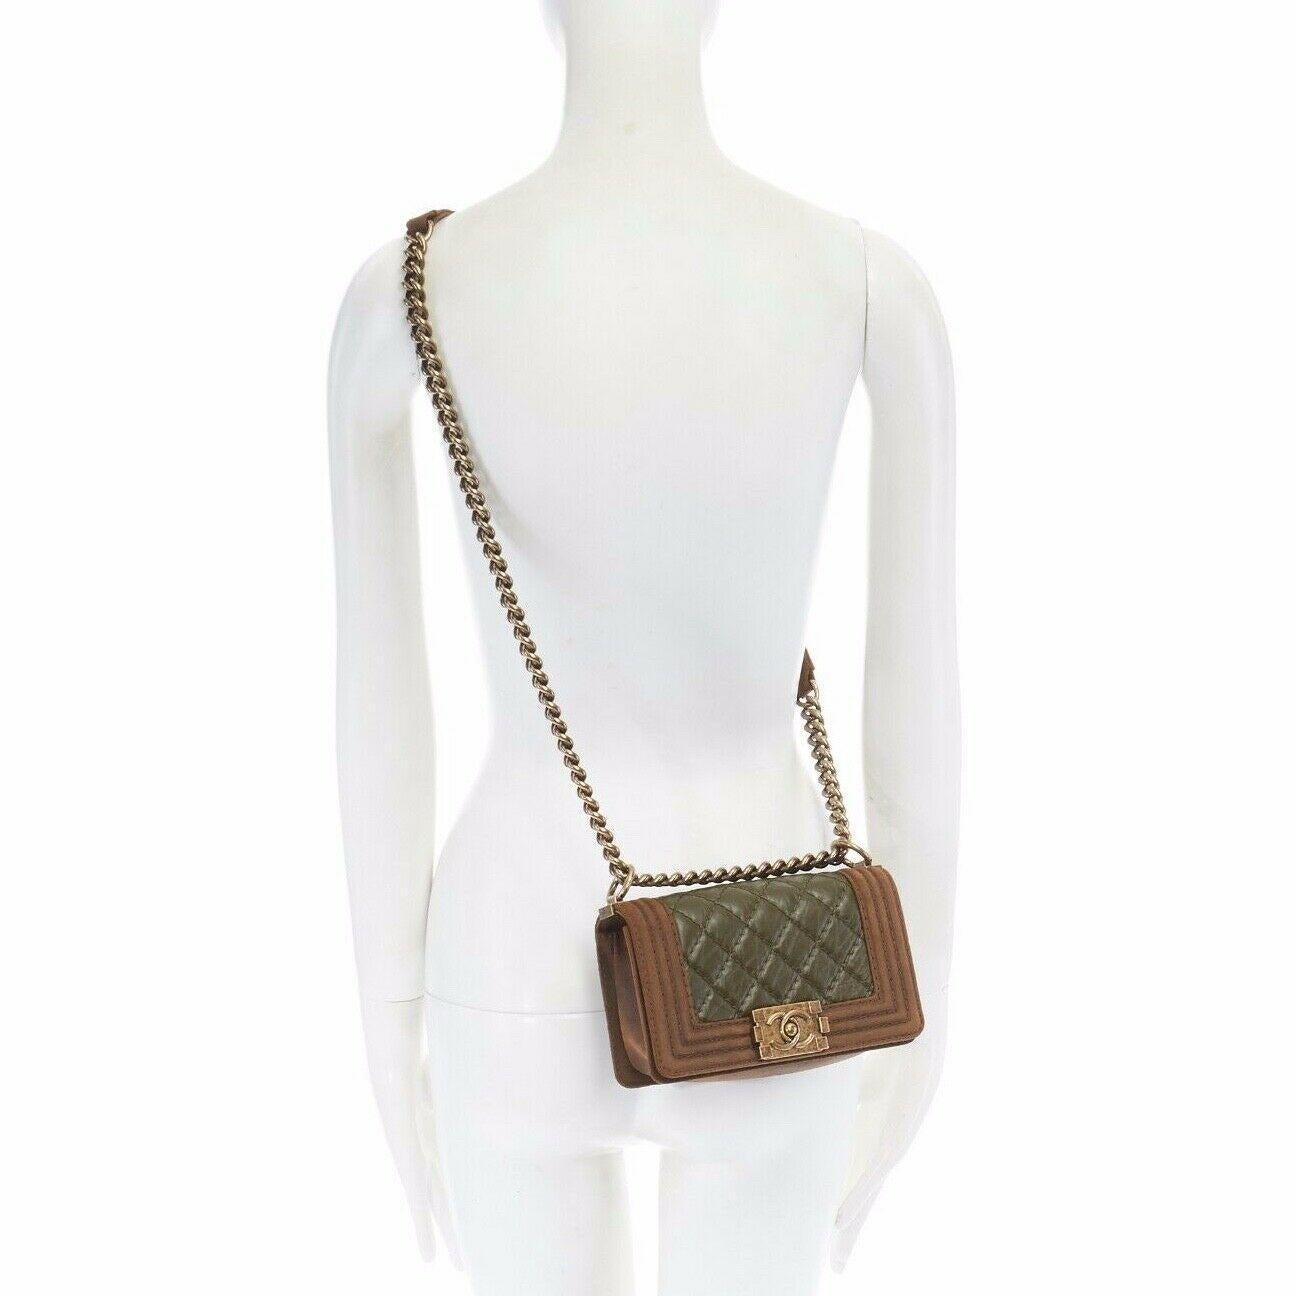 CHANEL Boy Small brown suede khaki quilted leather gold chain shouulder bag

CHANEL
Boy Bag. Small size. Khaki green aged leather body with tonal green quilt stitching. Brown distressed suede laether frame. Vintage gold-tone hardware. Signature CC